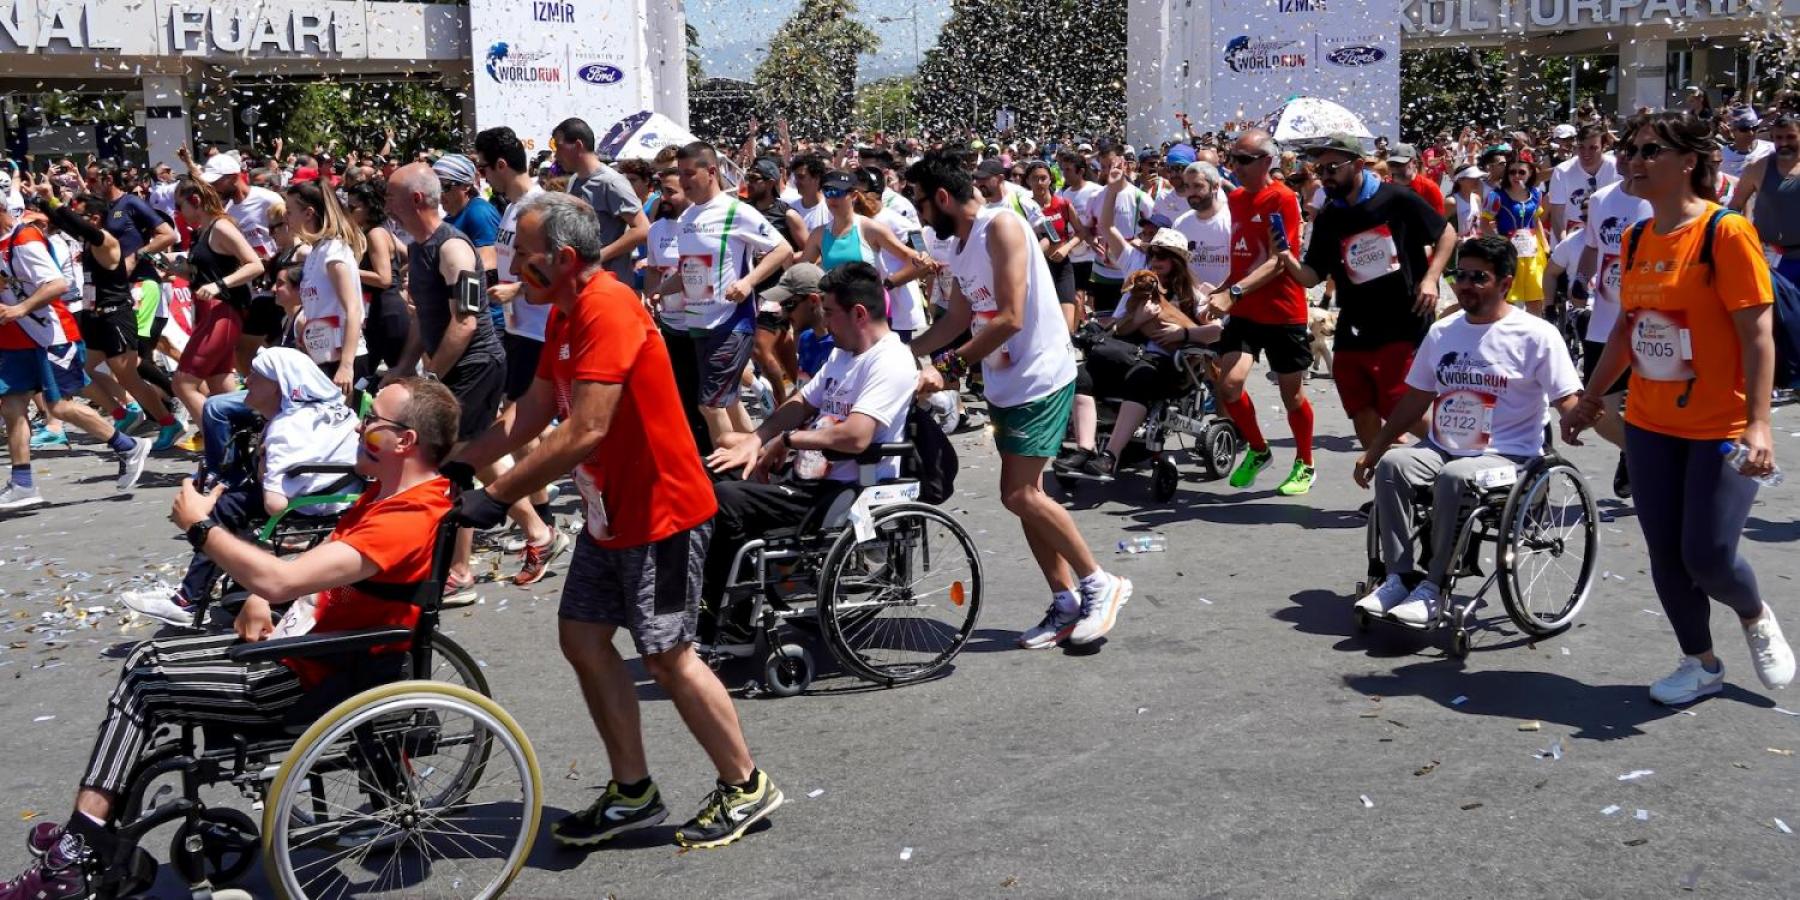 Physical activity event in Turkey